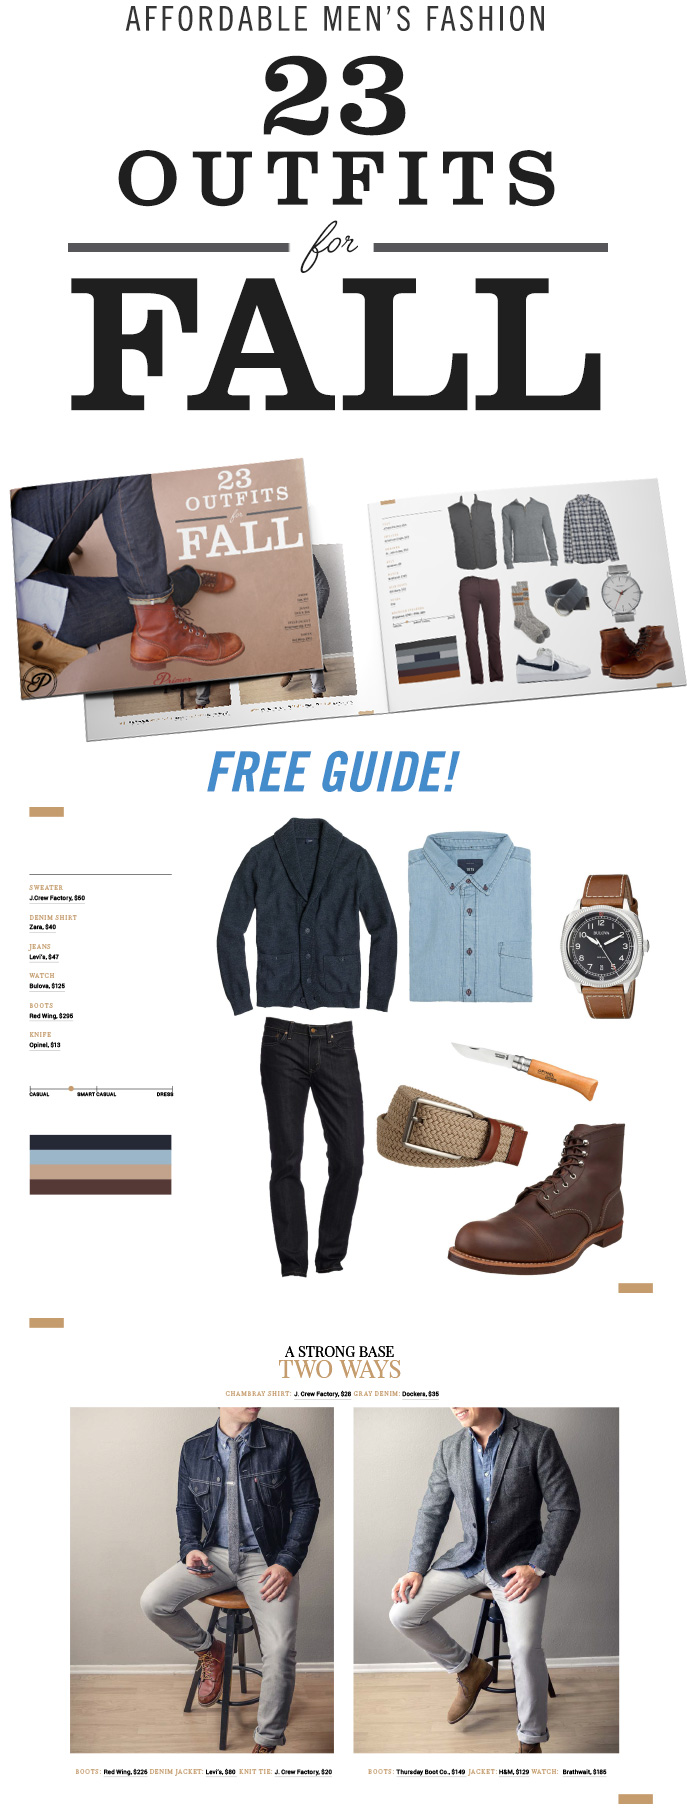 Men's Fall Fashion   23 Outfits for Men   Men's Style Inpsiration